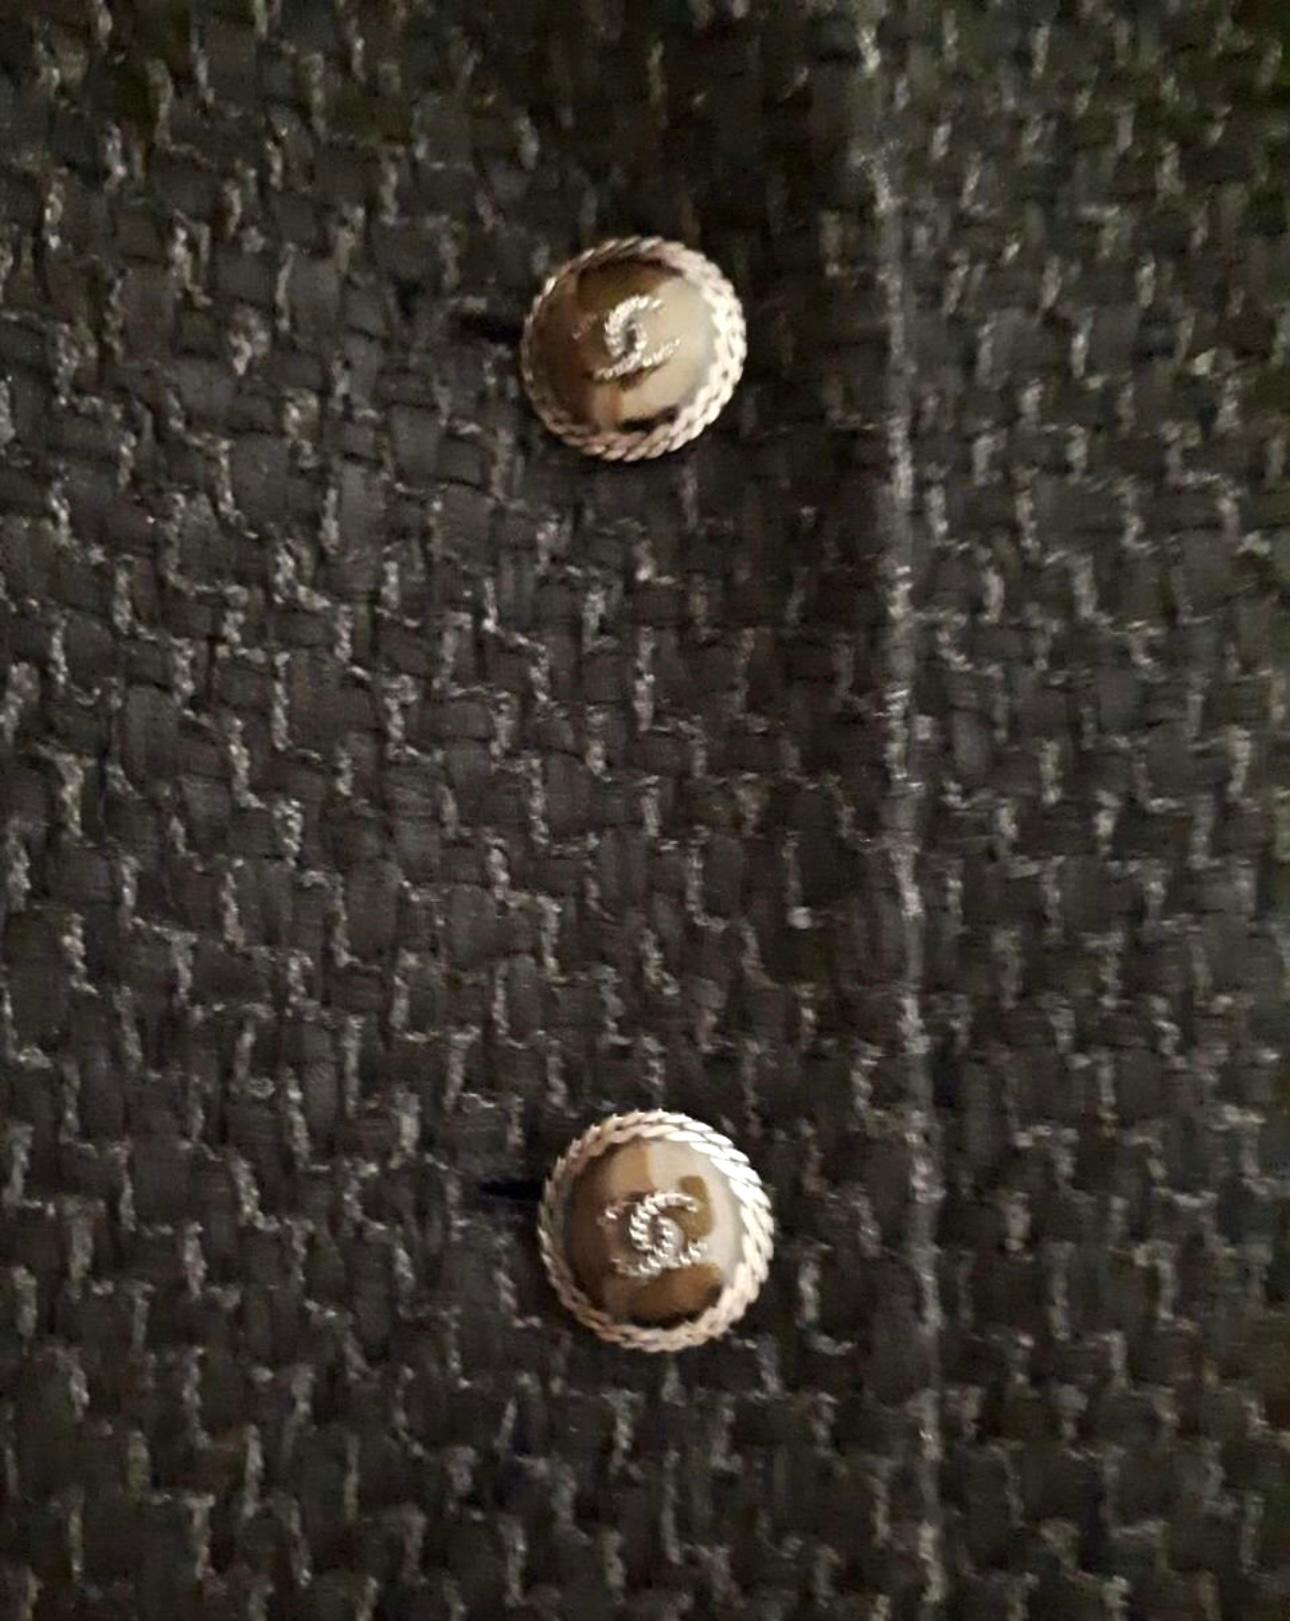 Timeless Chanel black tweed cocktail dress with CC buttons.
Charming ruffled skirt part, tonal silk lining.
Size mark 40 FR. Never worn.